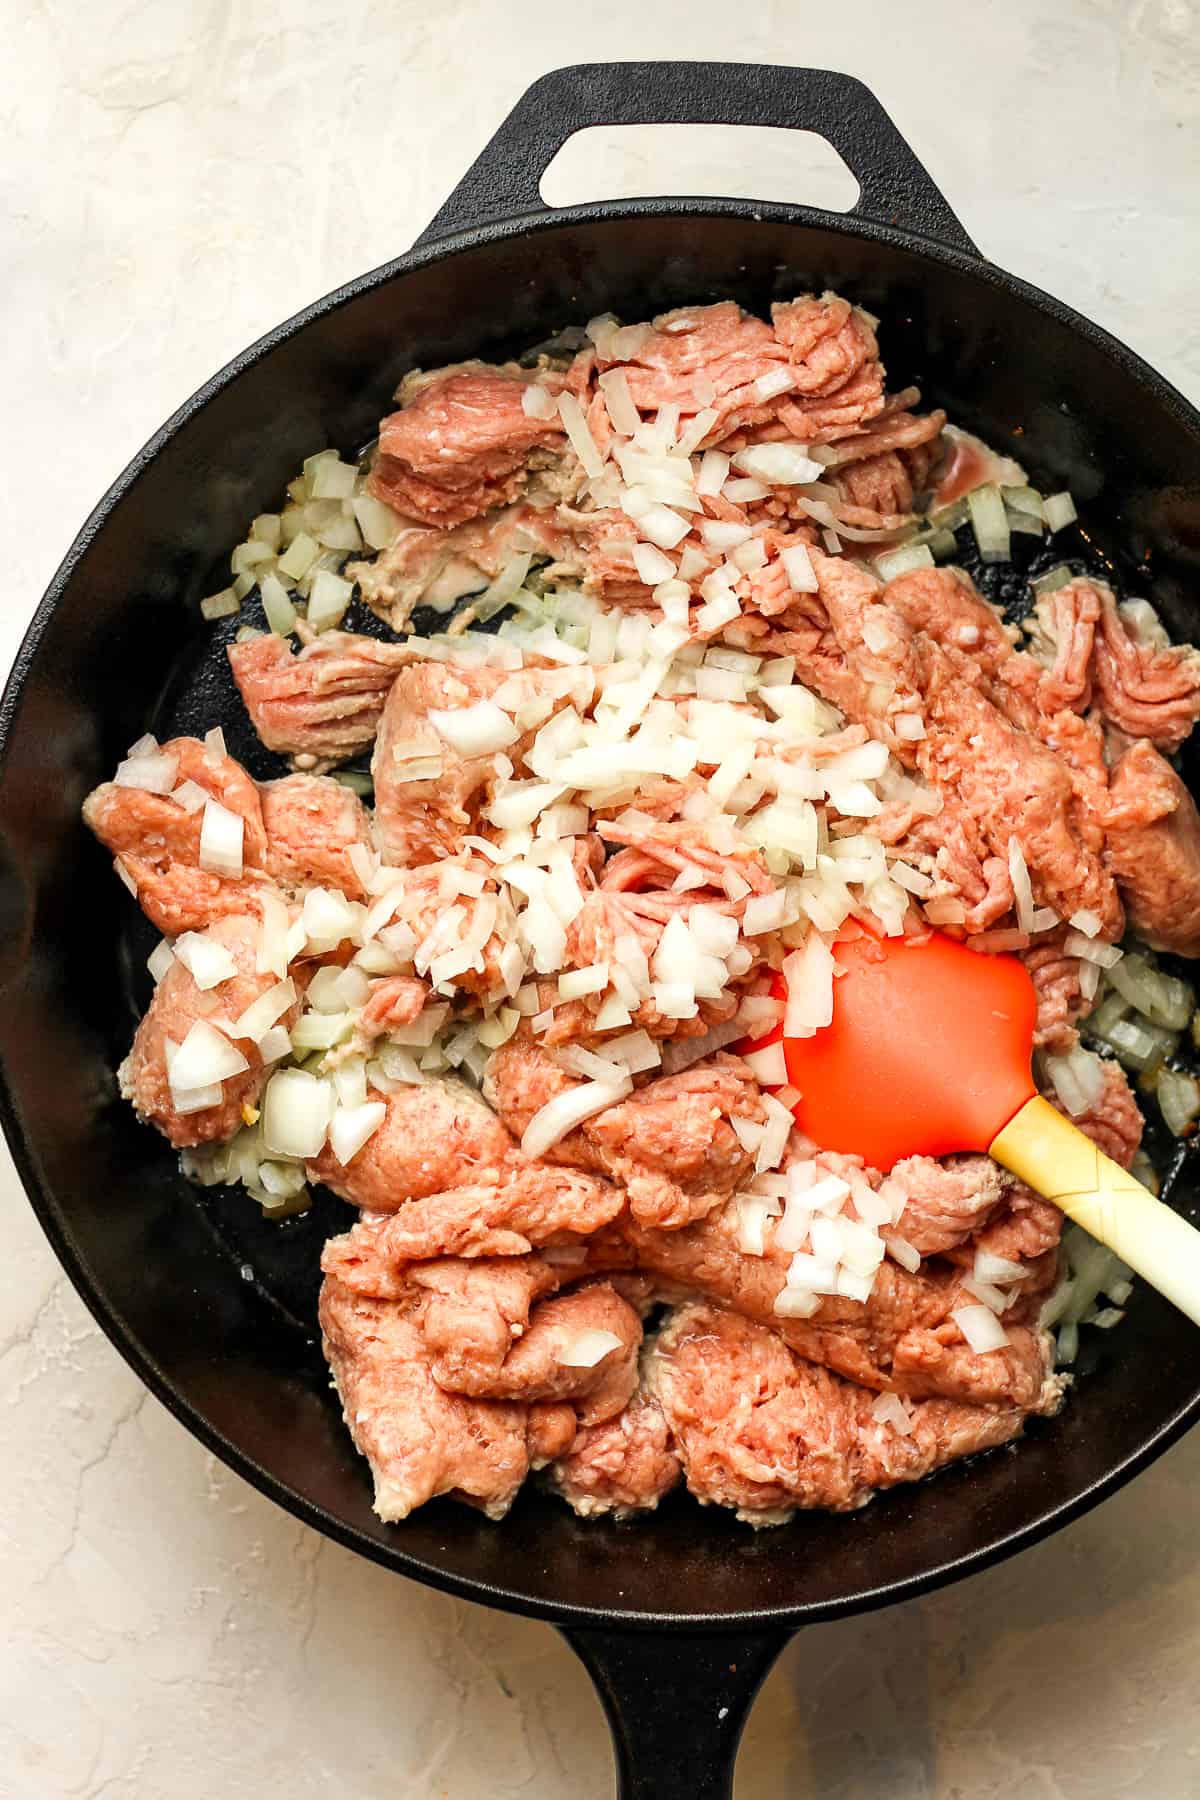 A skillet of the raw ground turkey and onions.